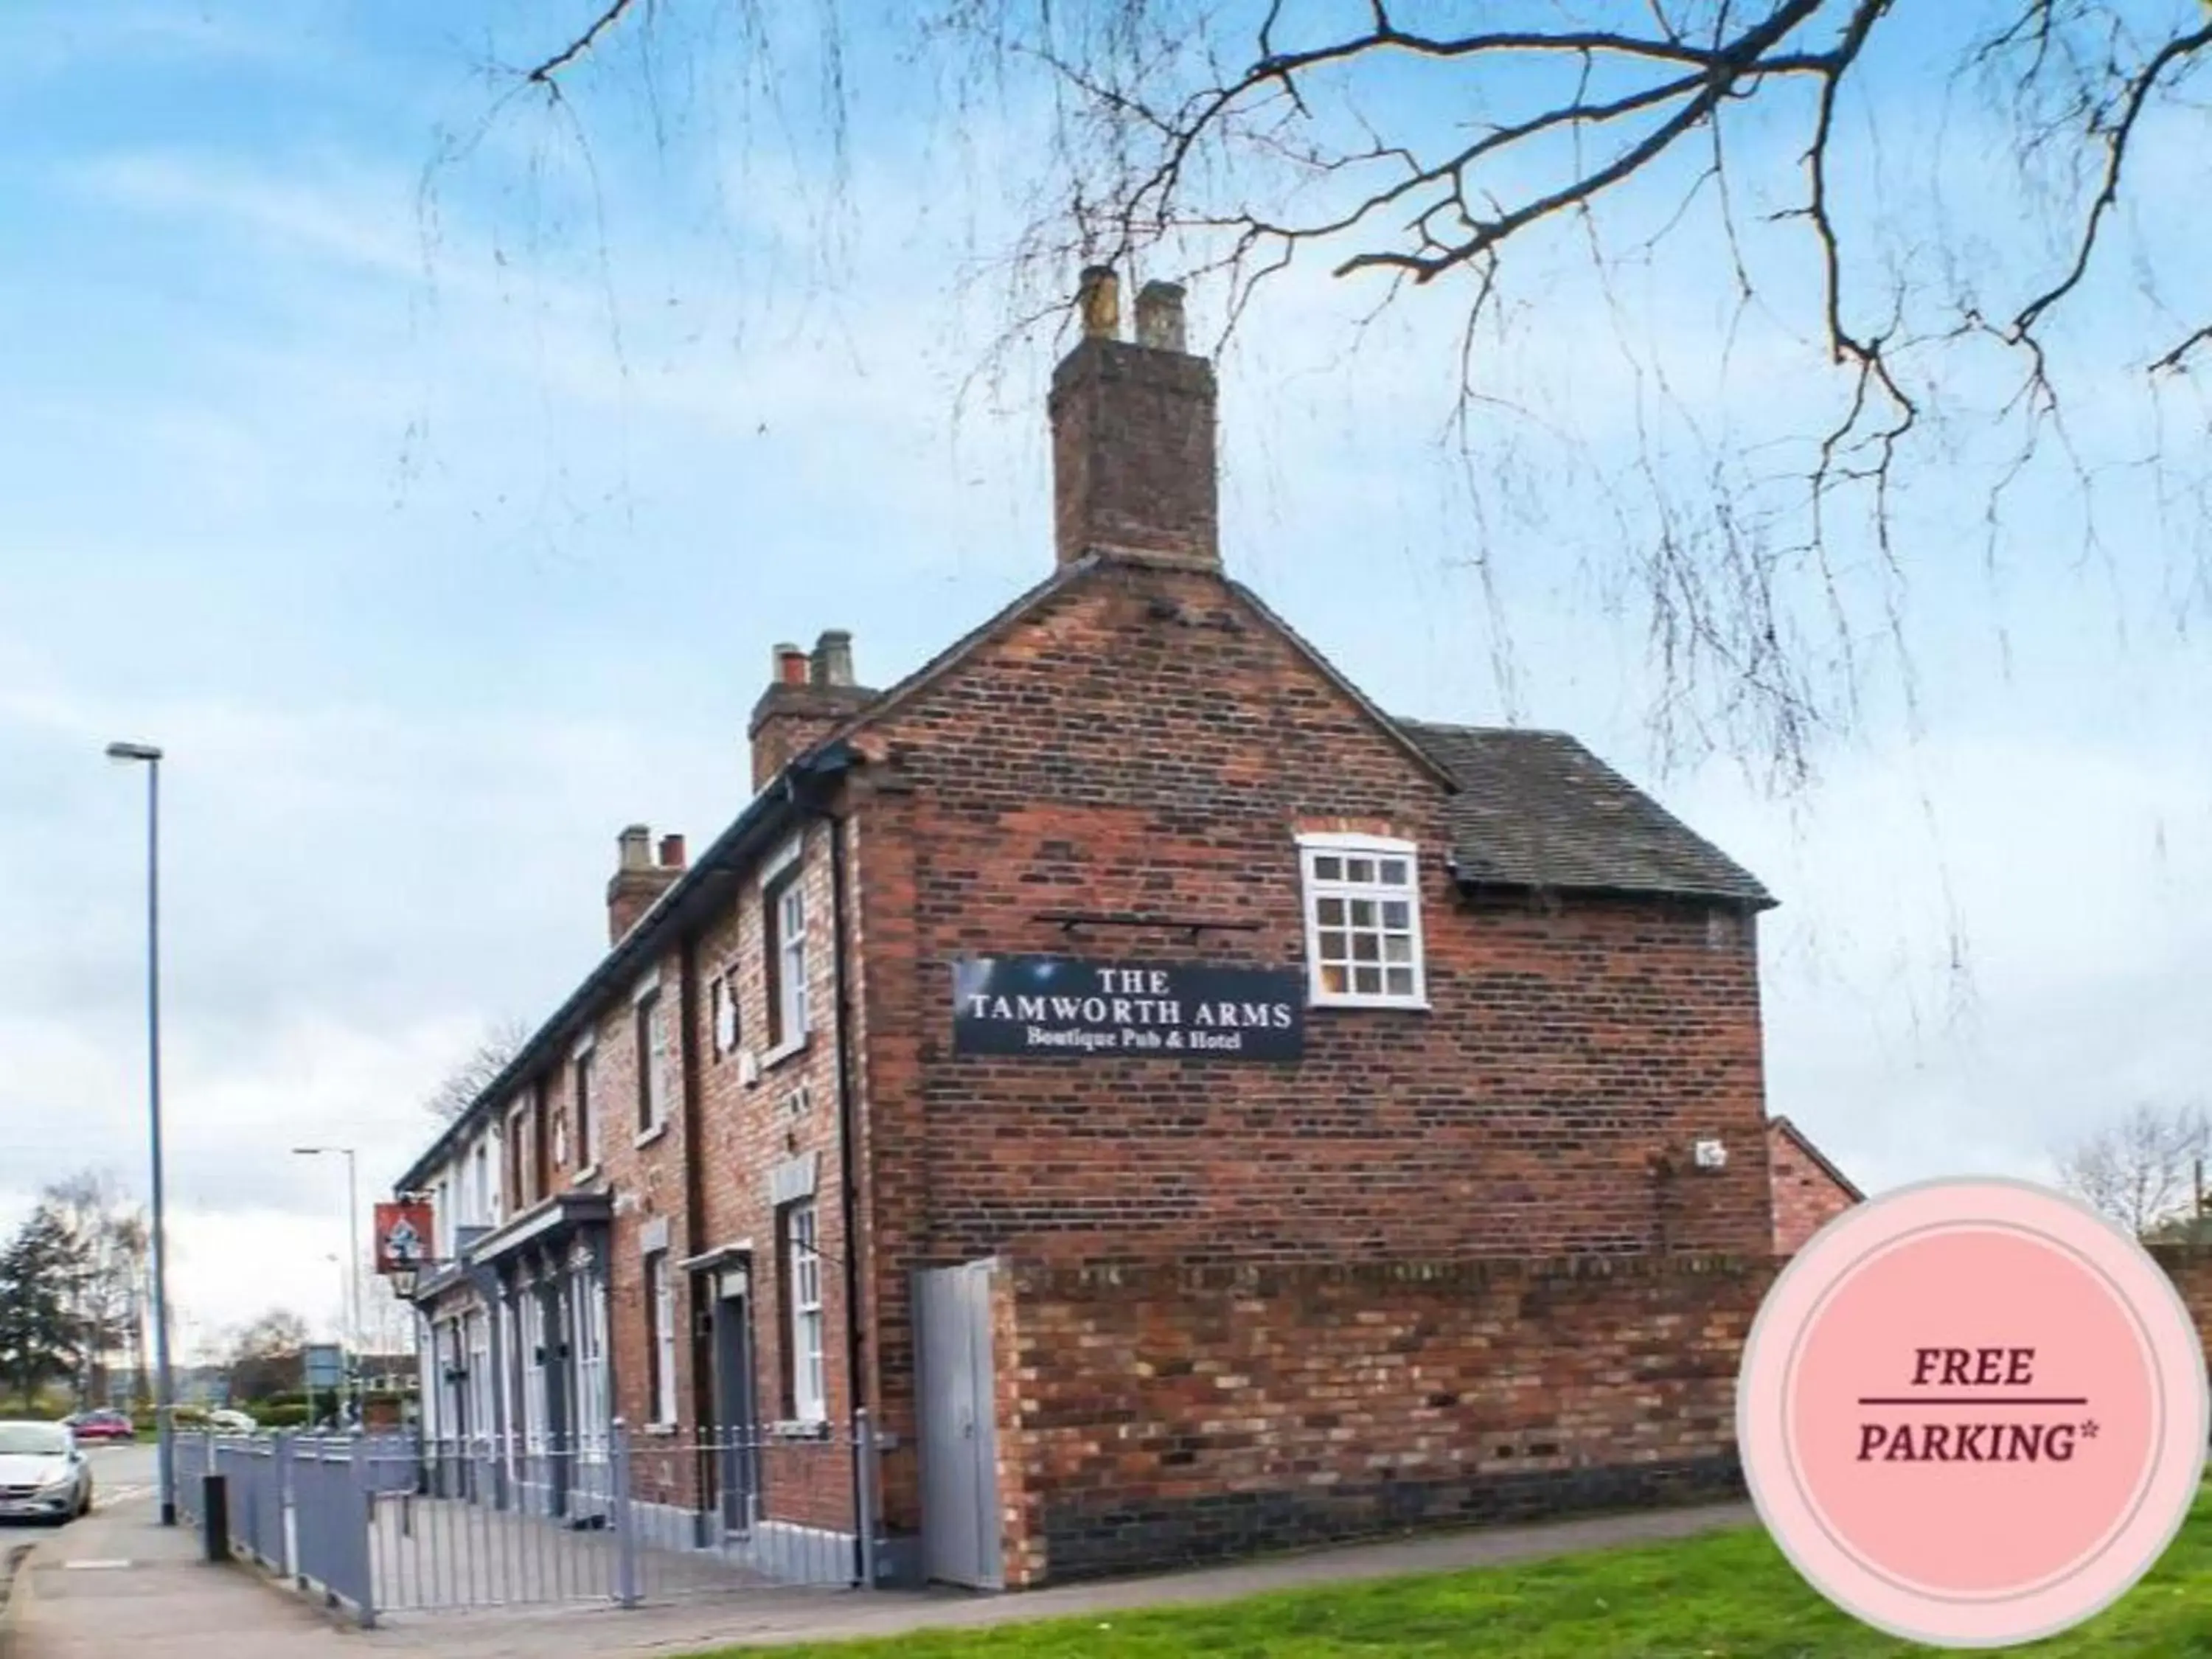 Property Building in OYO Tamworth Arms Boutique Pub & Hotel